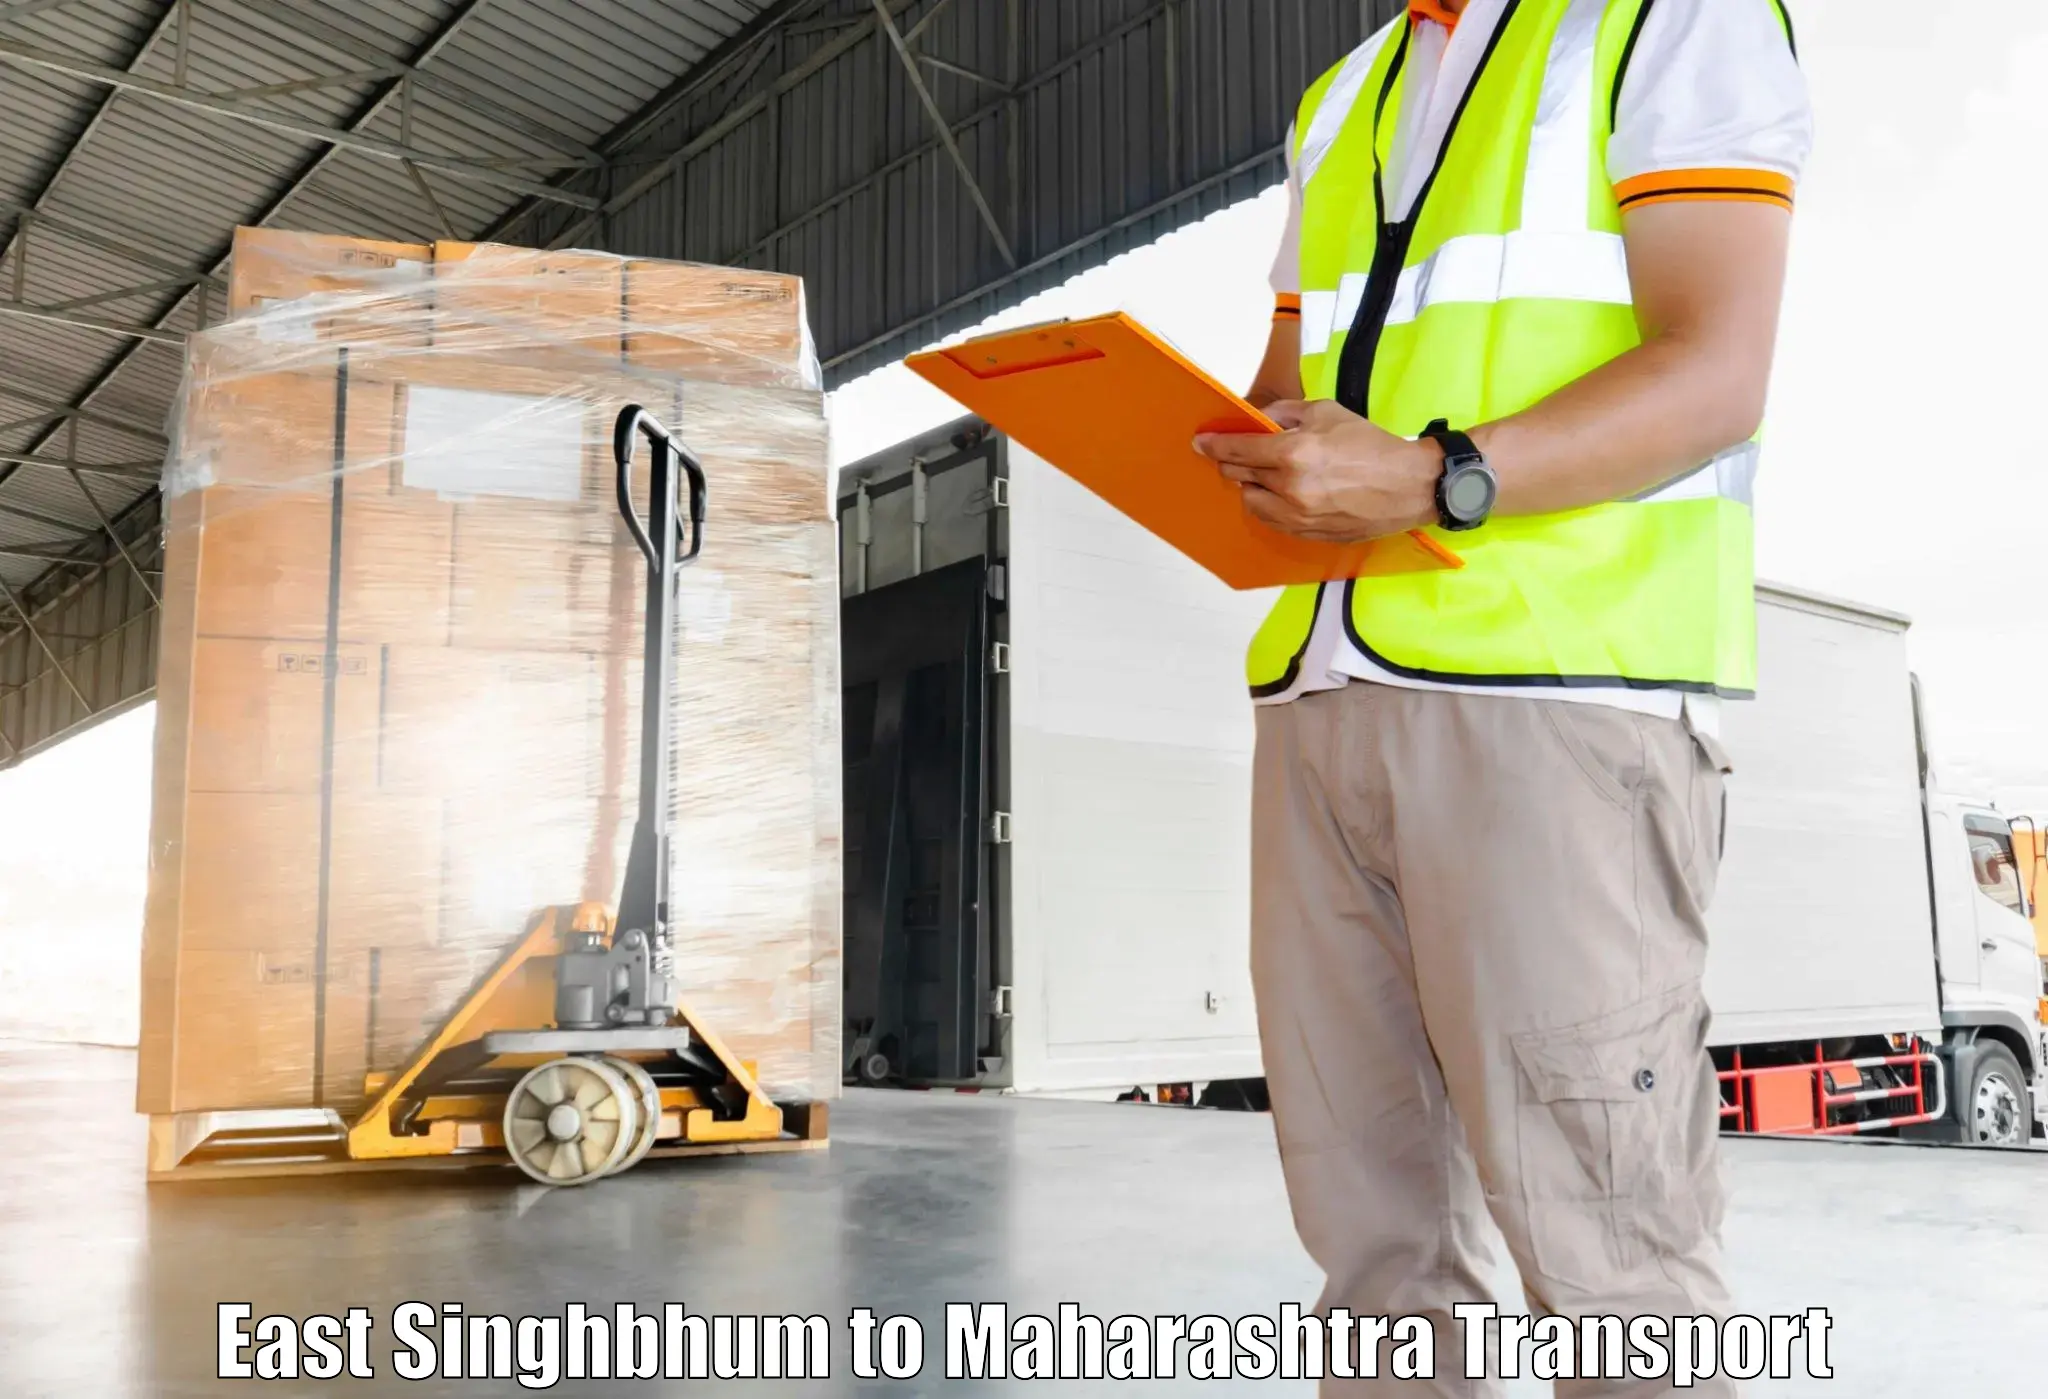 Air cargo transport services East Singhbhum to Osmanabad